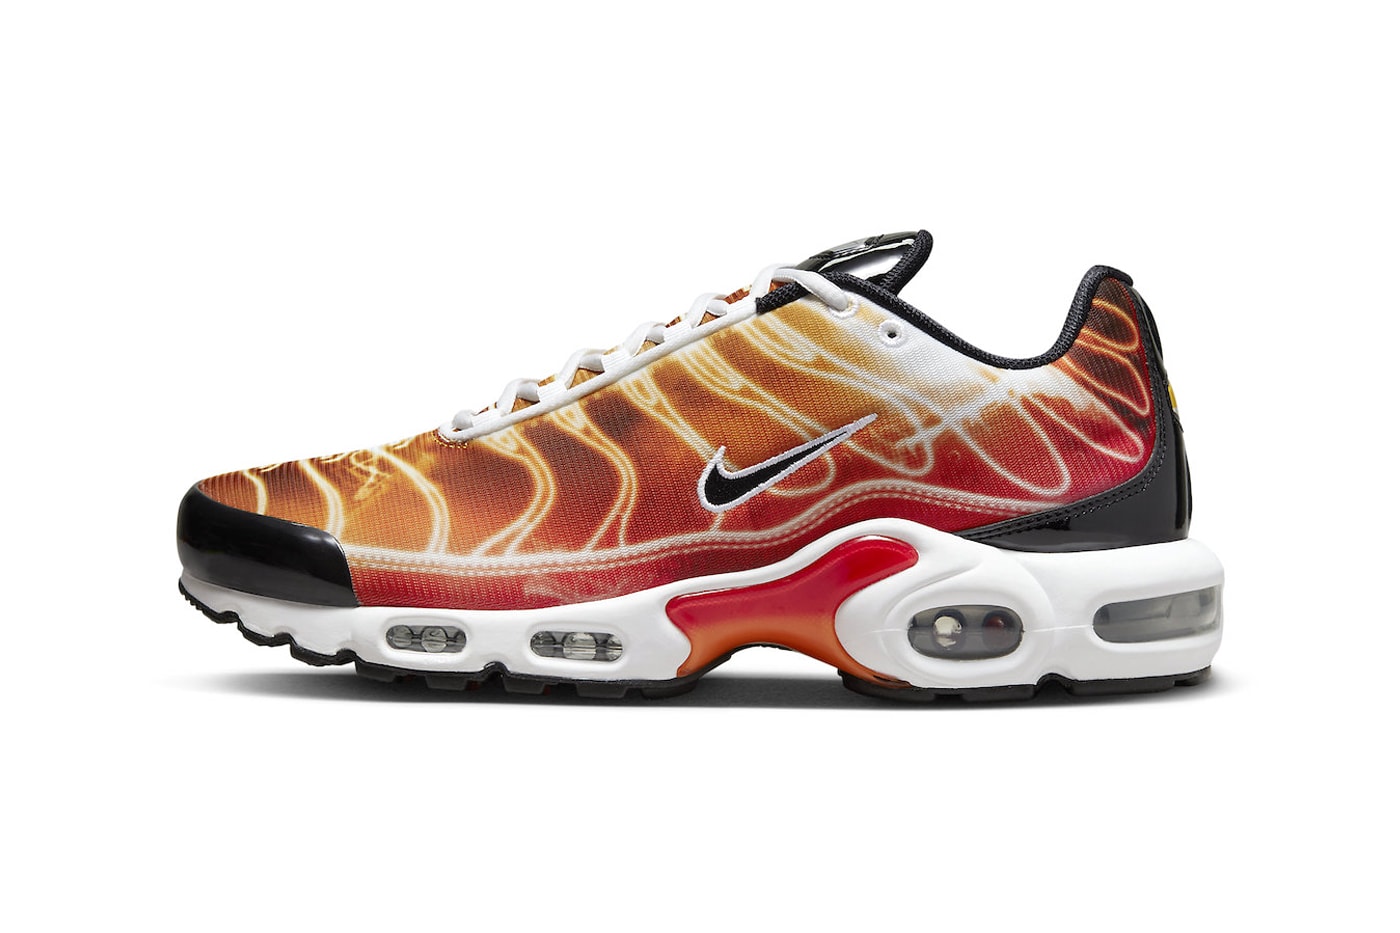 Nike Air Max Plus "Light Photography"  Receives a Fiery Makeover DZ3531-600 release info sean mcdowell technical shoe nike swoosh 